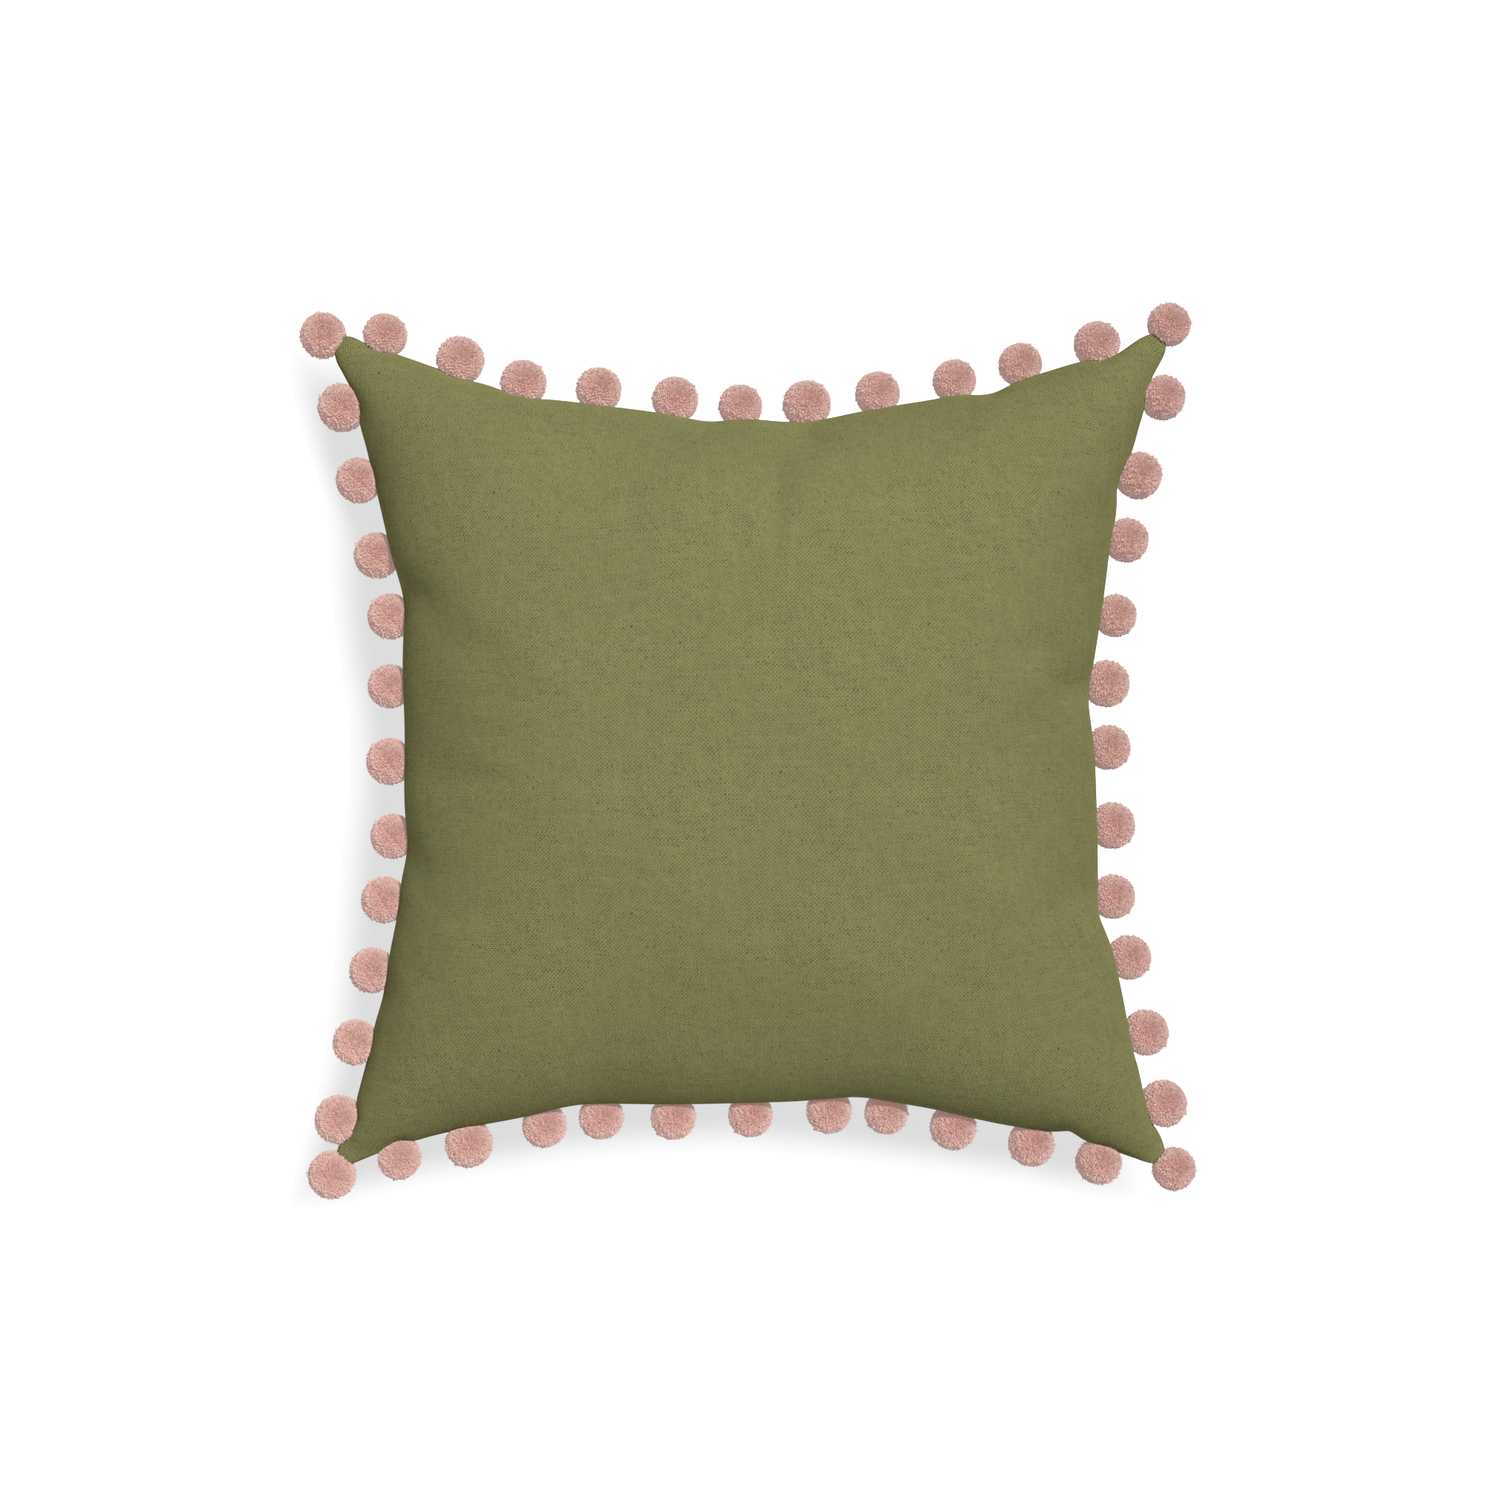 18-square moss custom moss greenpillow with rose pom pom on white background